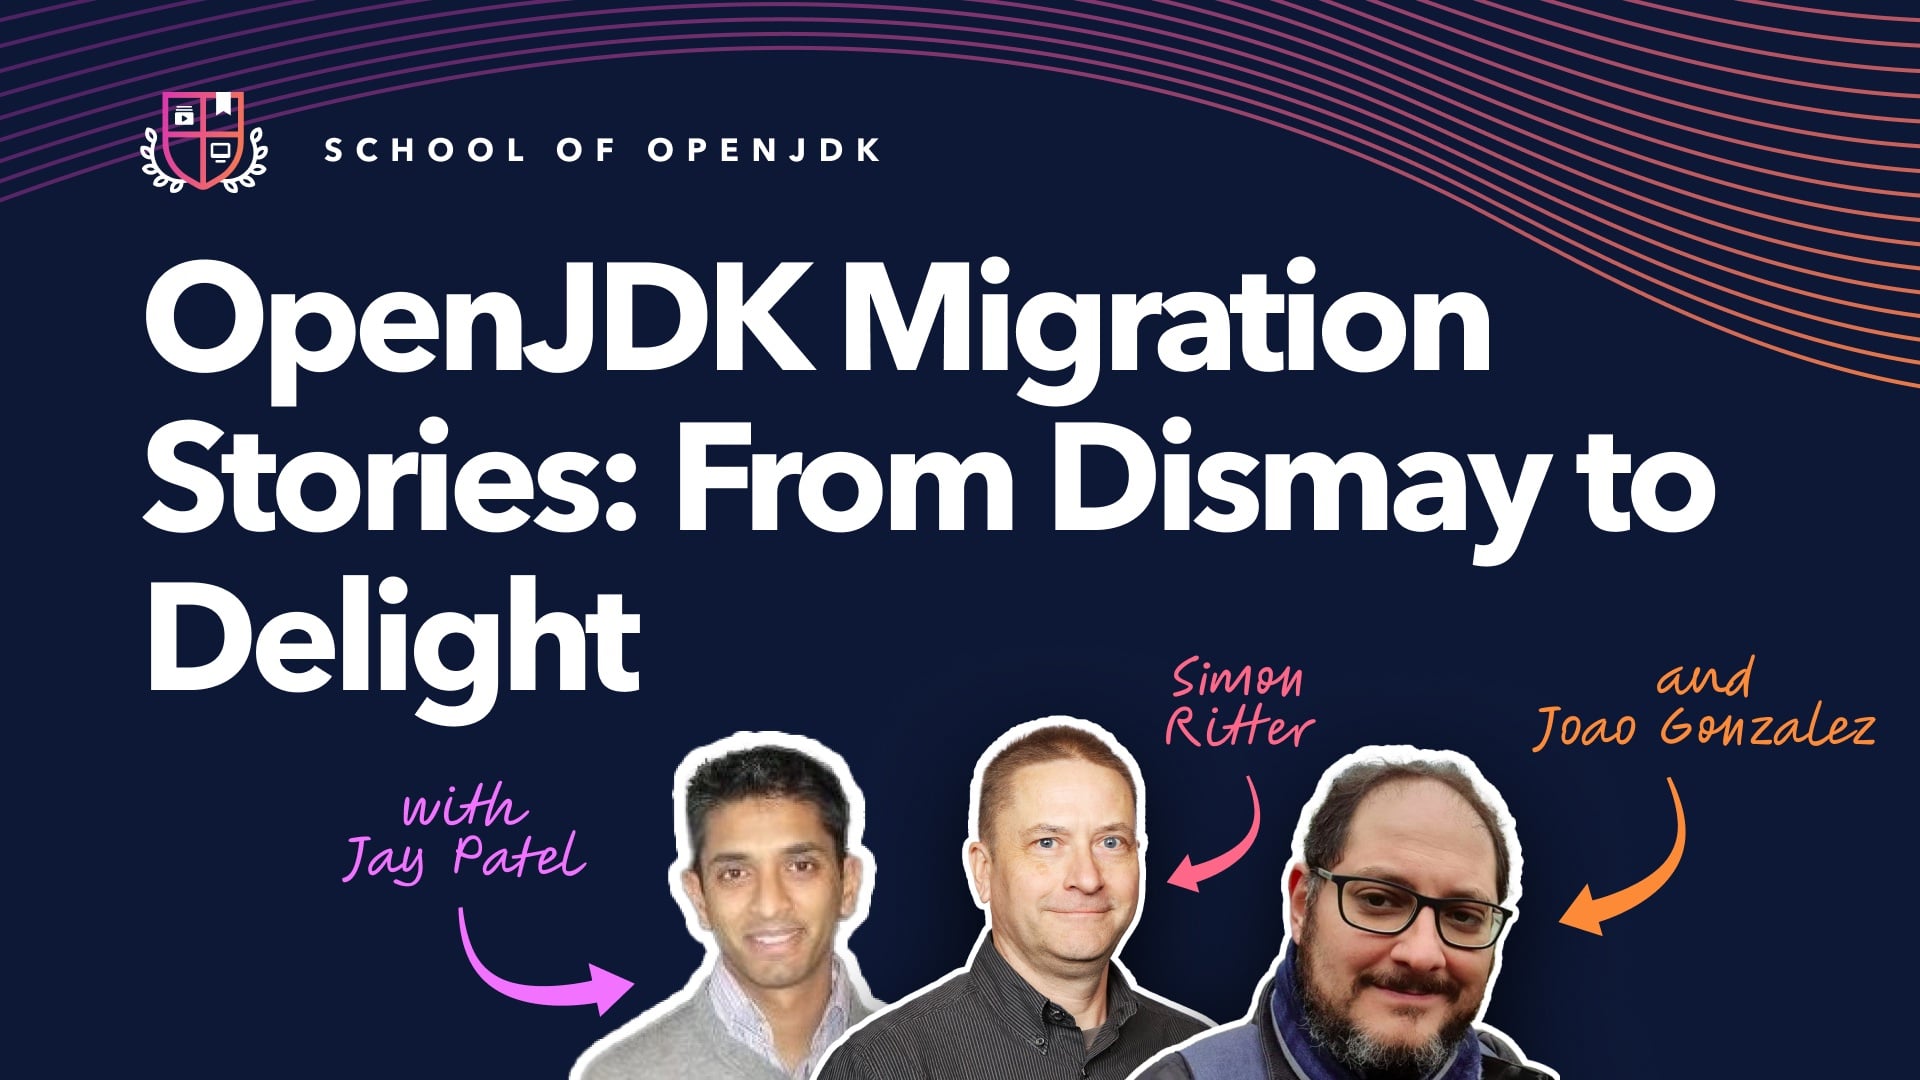 OpenJDK Migration Stories - From Dismay to Delight